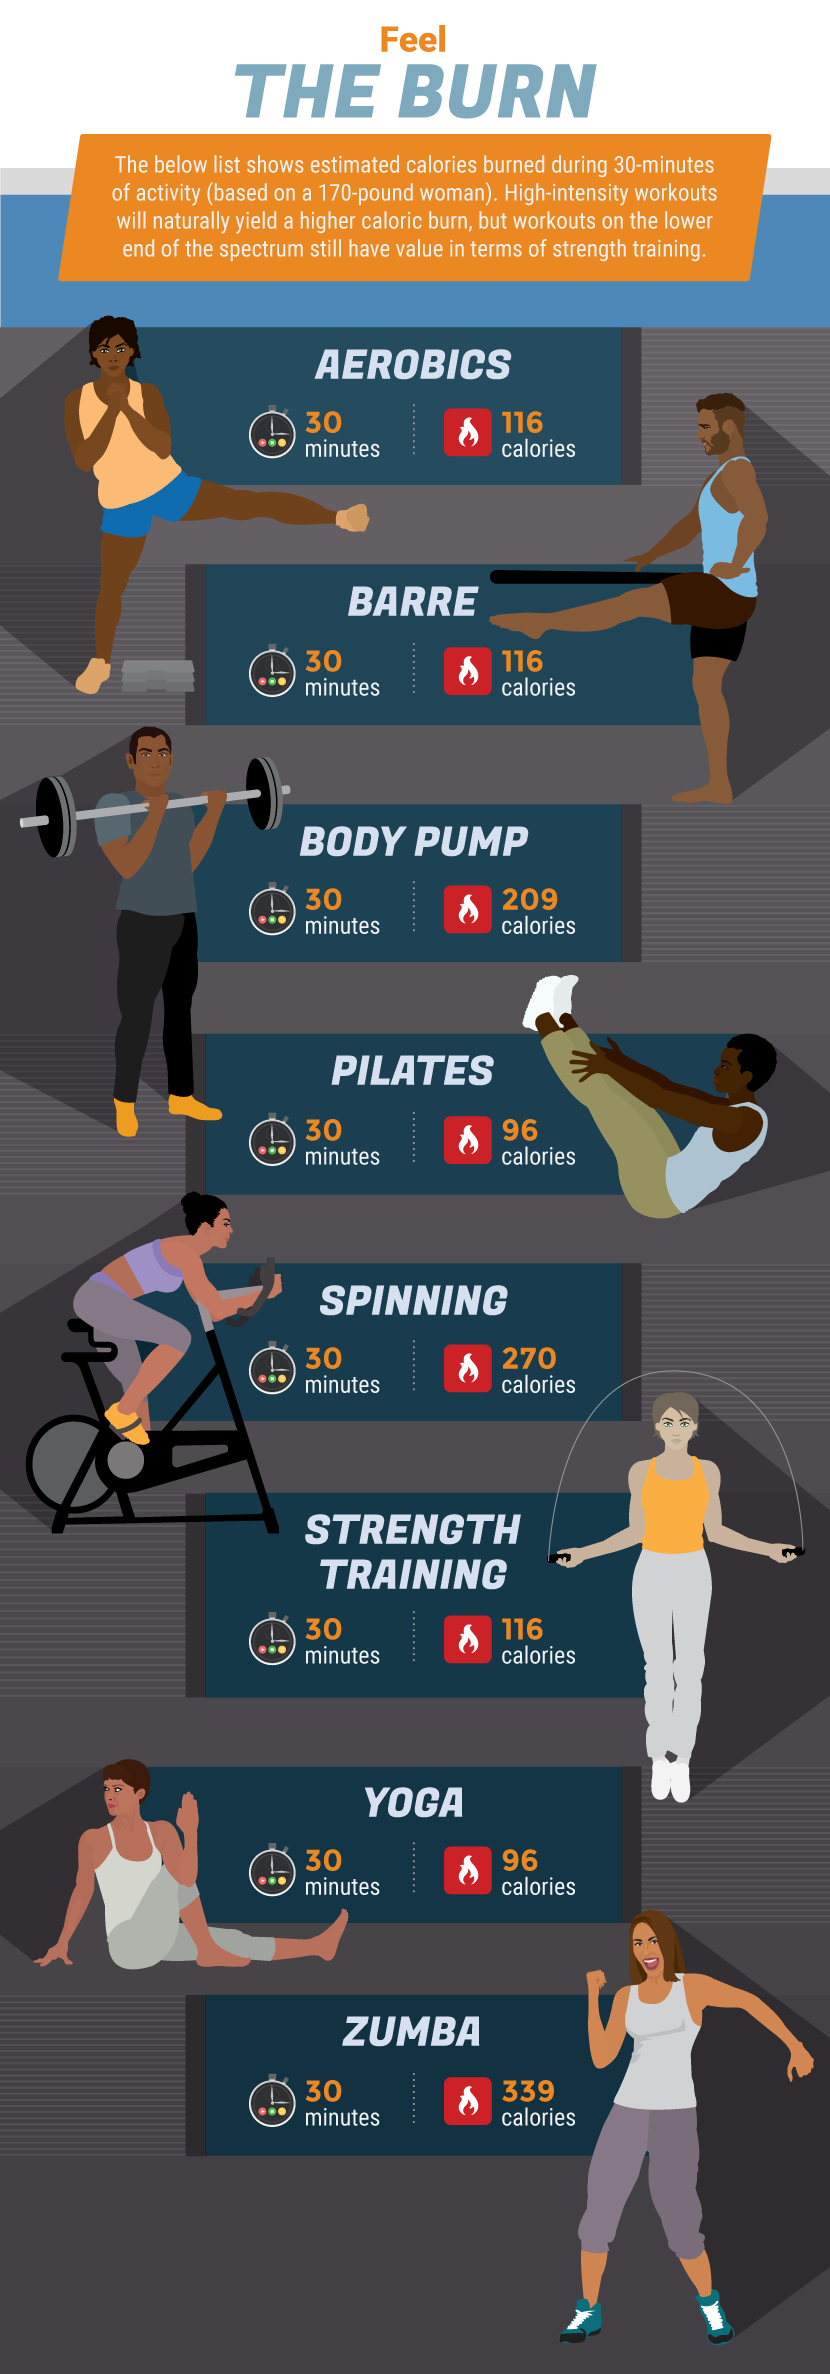 Feel The Burn - Picking the Best Fitness Class For You